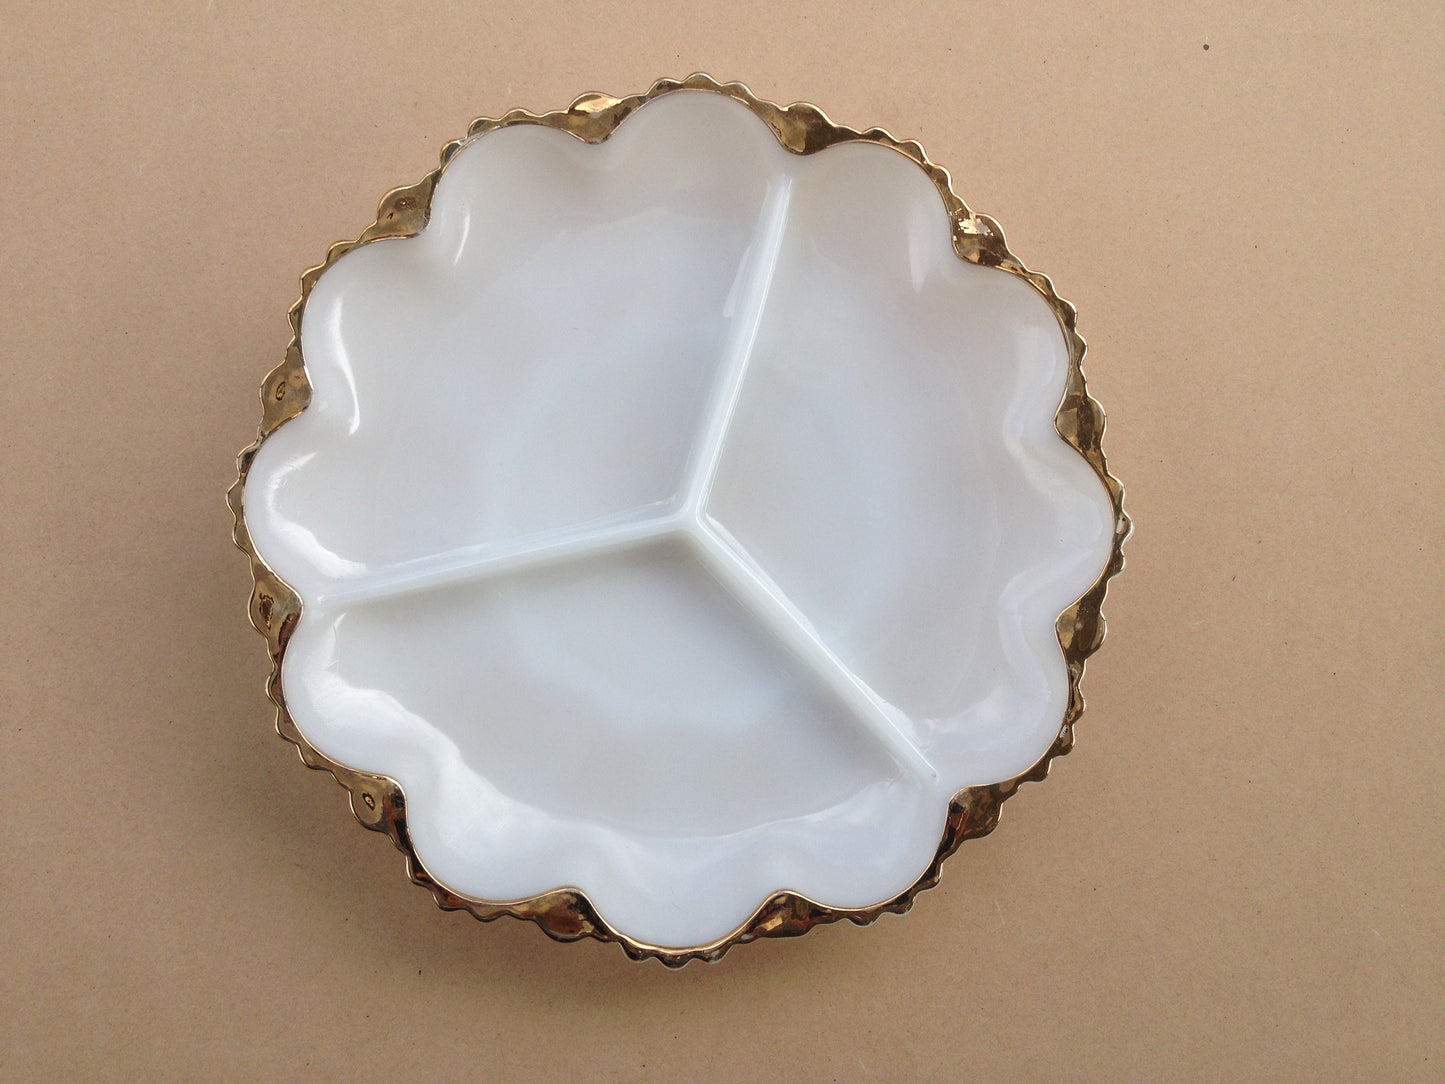 Circular White Glass Serving Dish with Gold Edge